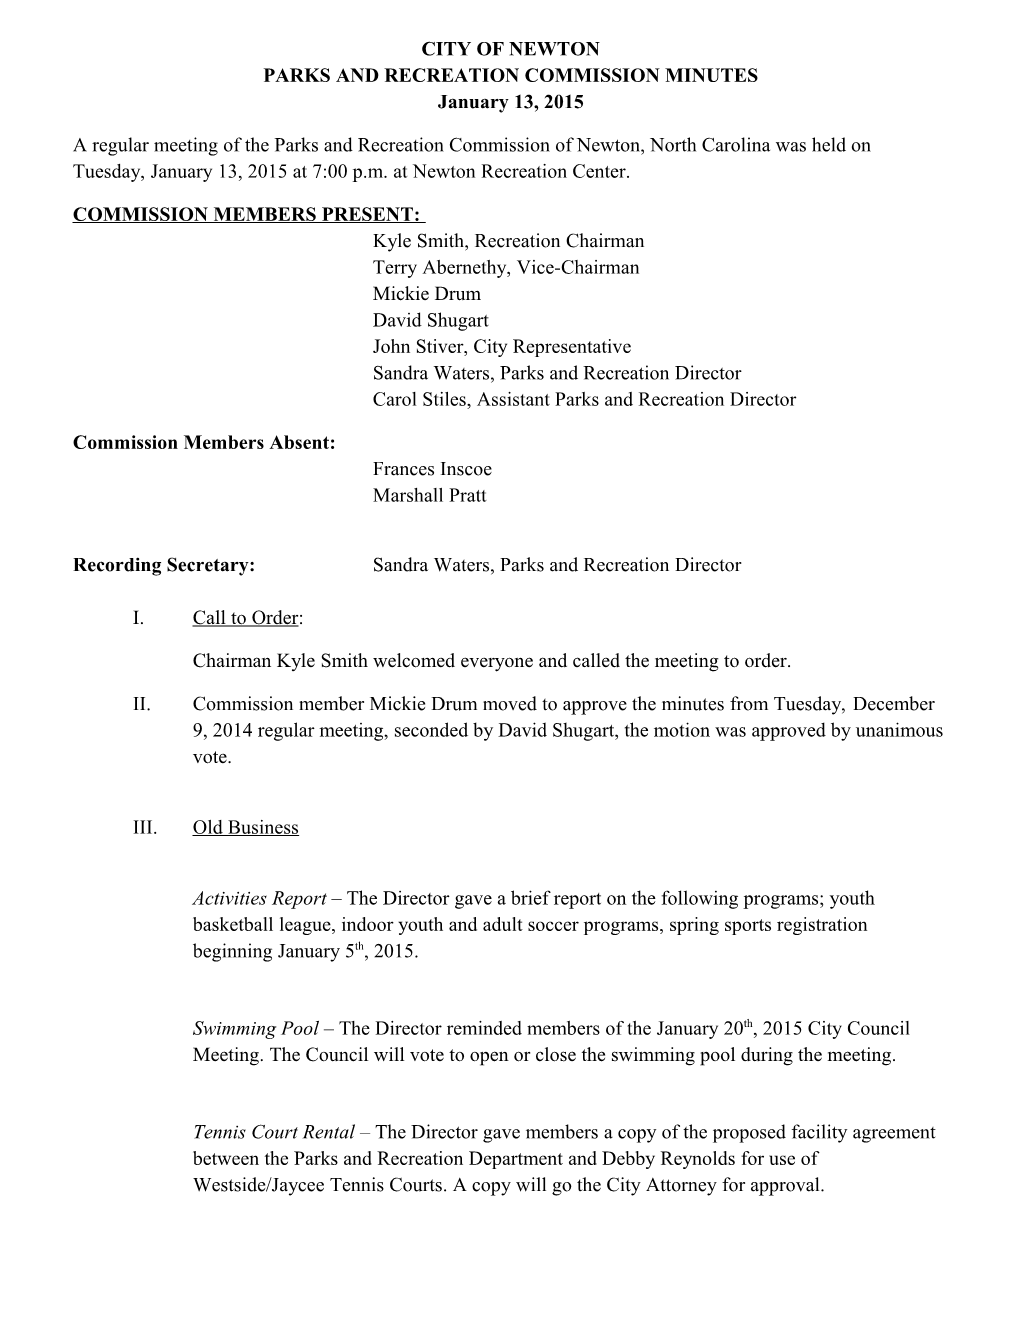 City of Newton Parks and Recreation Commission Minutes January 13, 2015